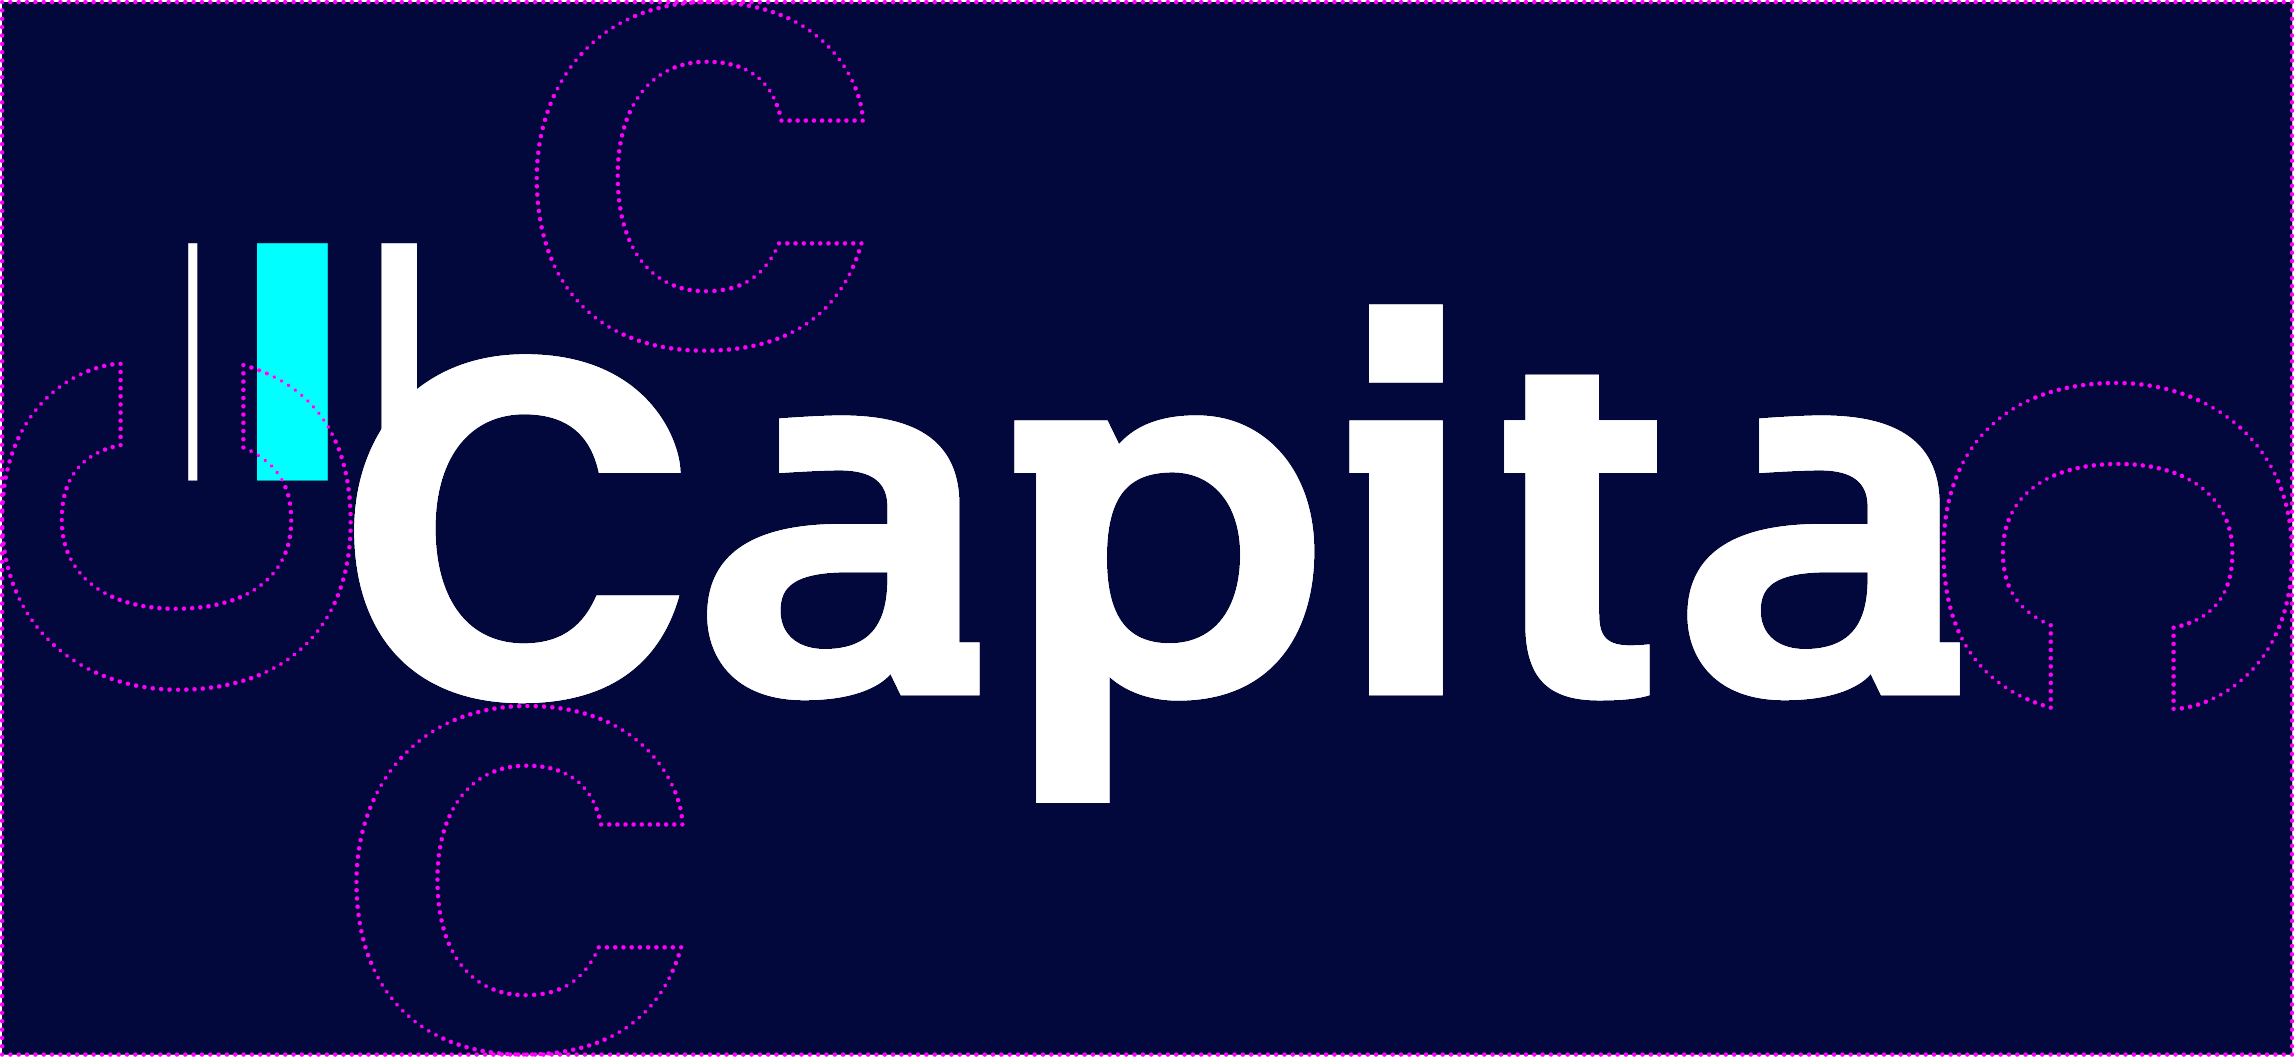 Capita logo - "Capita" written in white on a dark blue background with thin dark grey, thick light blue and thin light grey vertical stripes to the top left of the capital "C" 